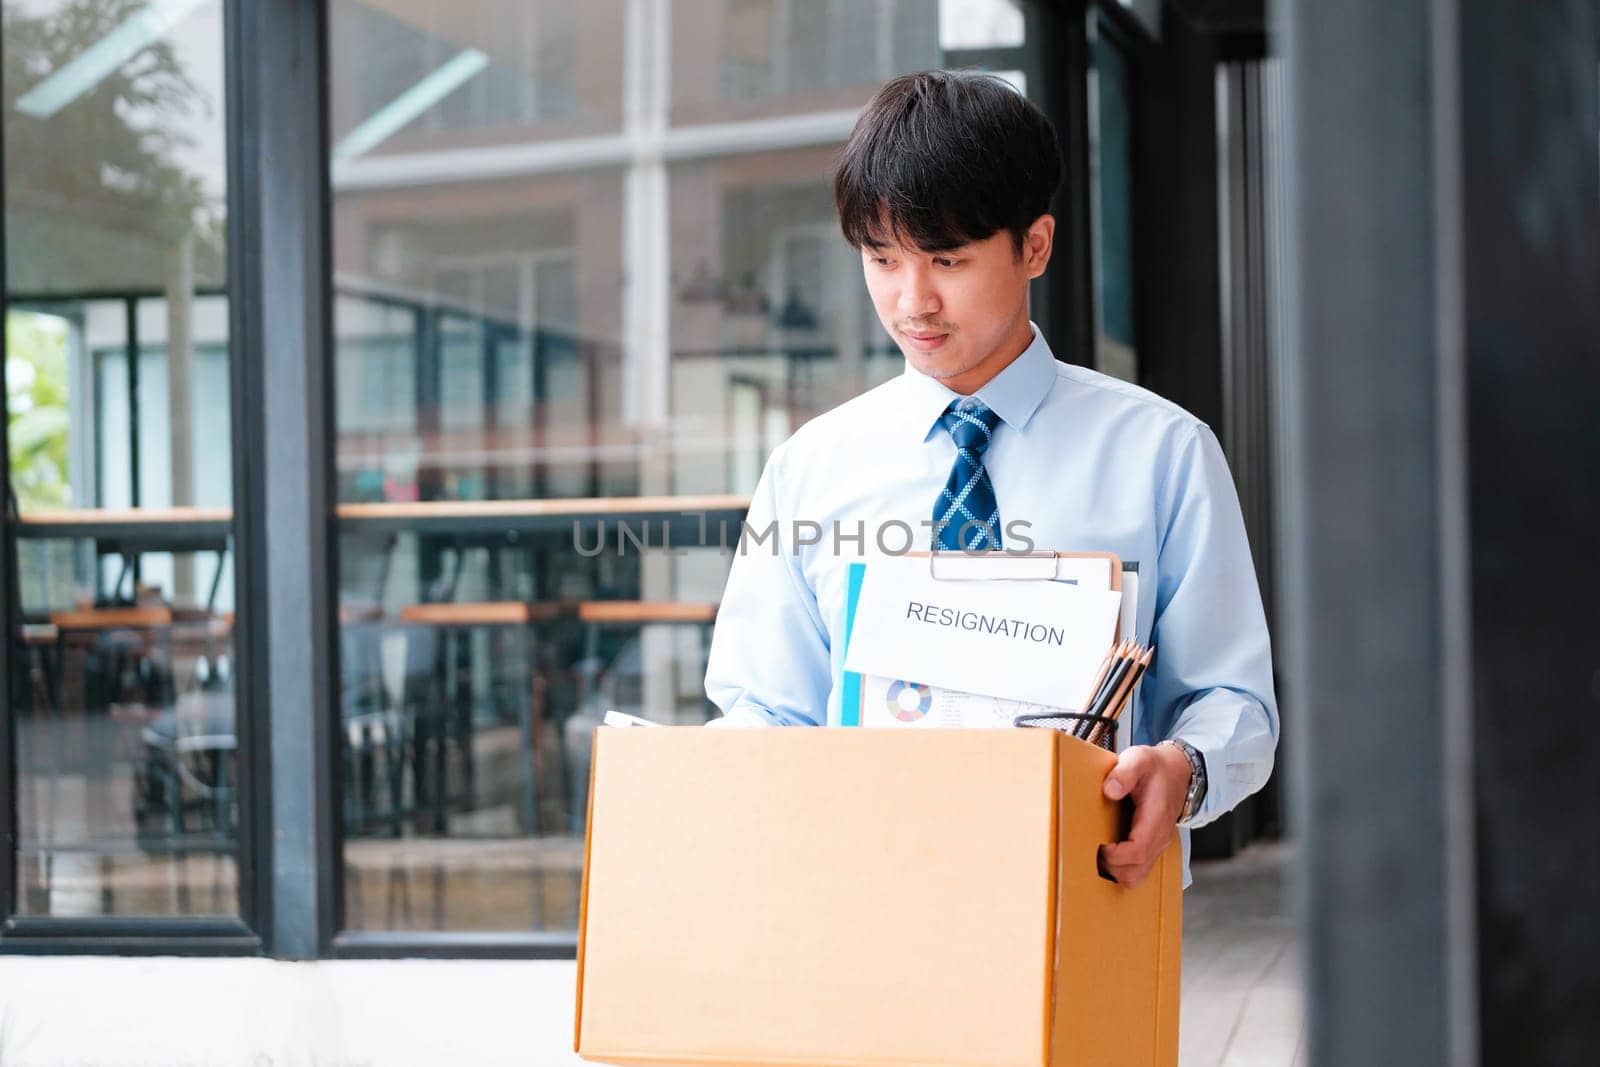 Professional Man Exiting Office with Personal Belongings and Resignation Letter, Embarking on a New Path After Job Resignation